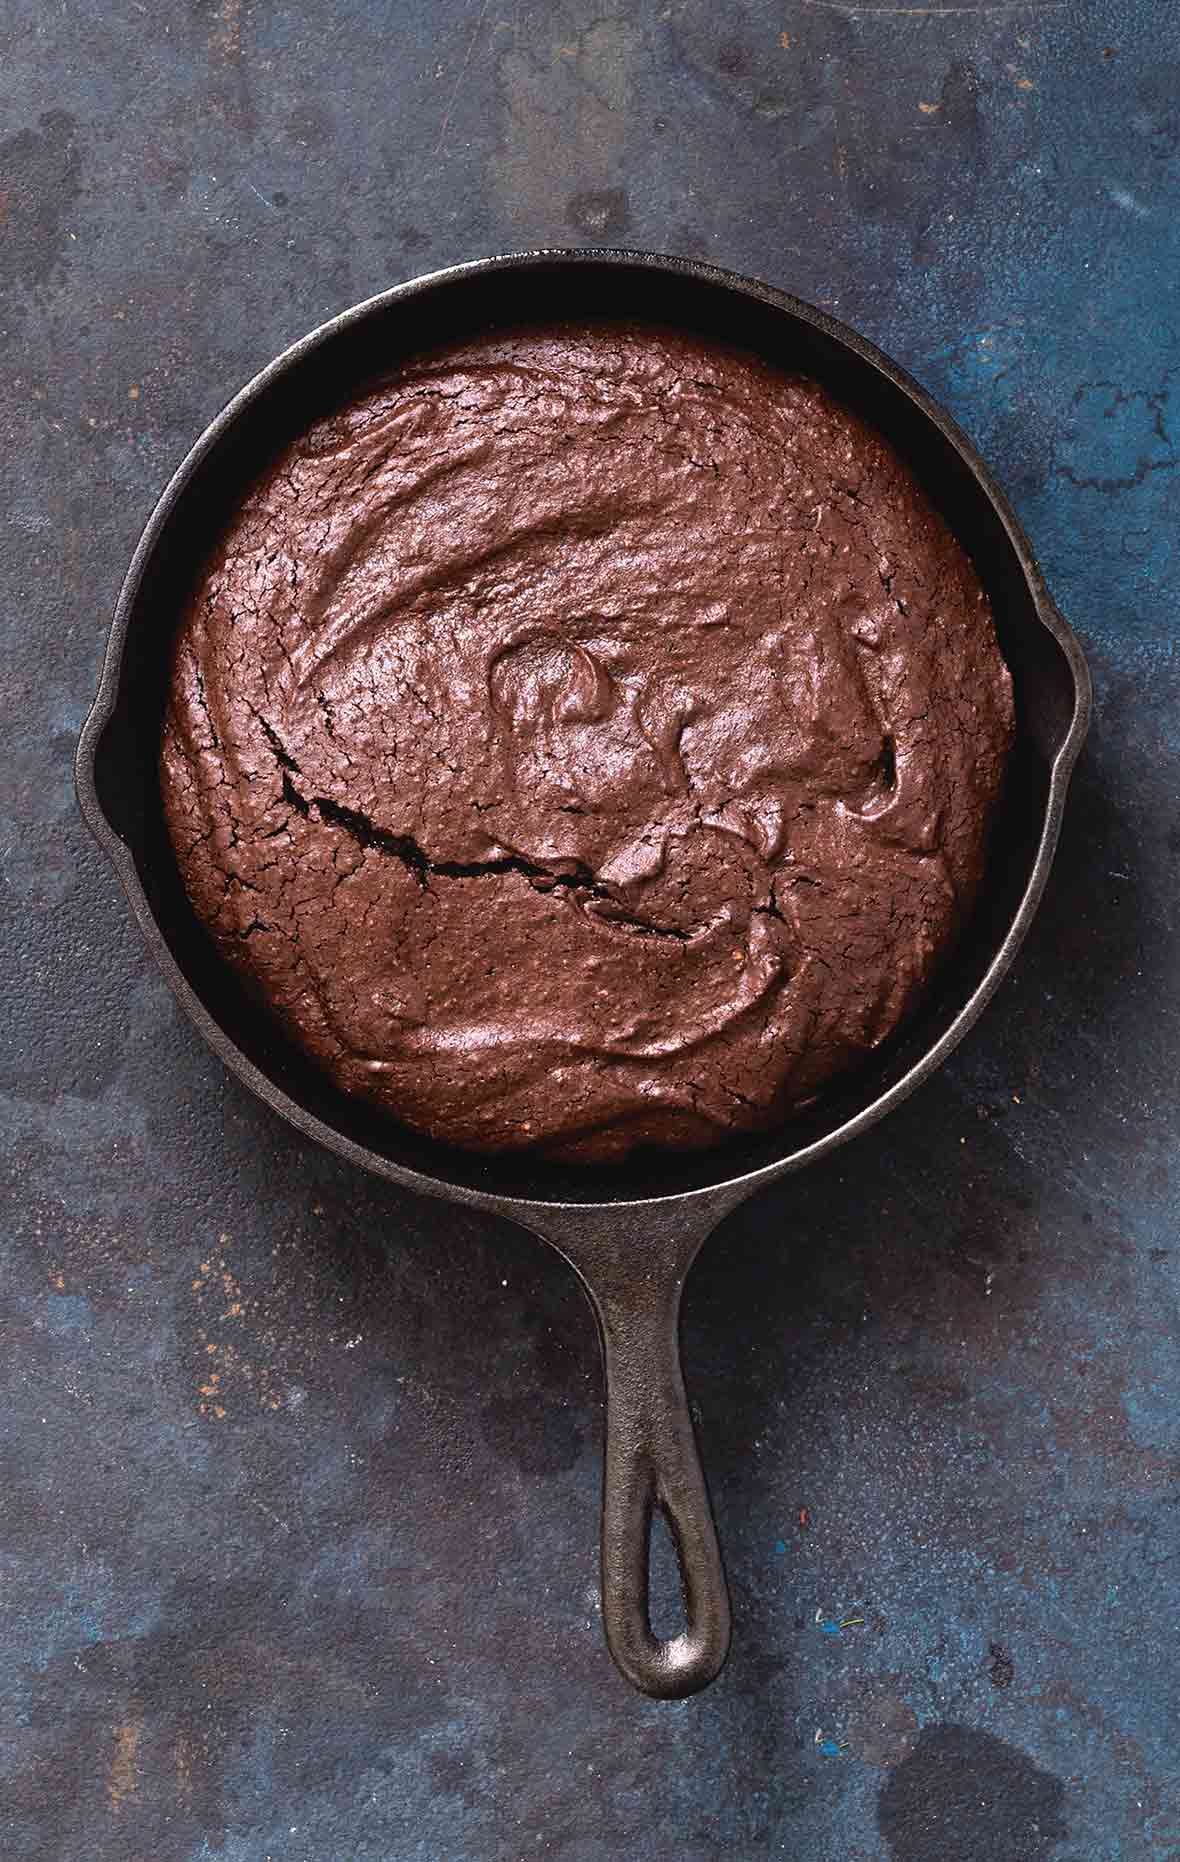 A cast-iron skillet filled with chocolate brownie.